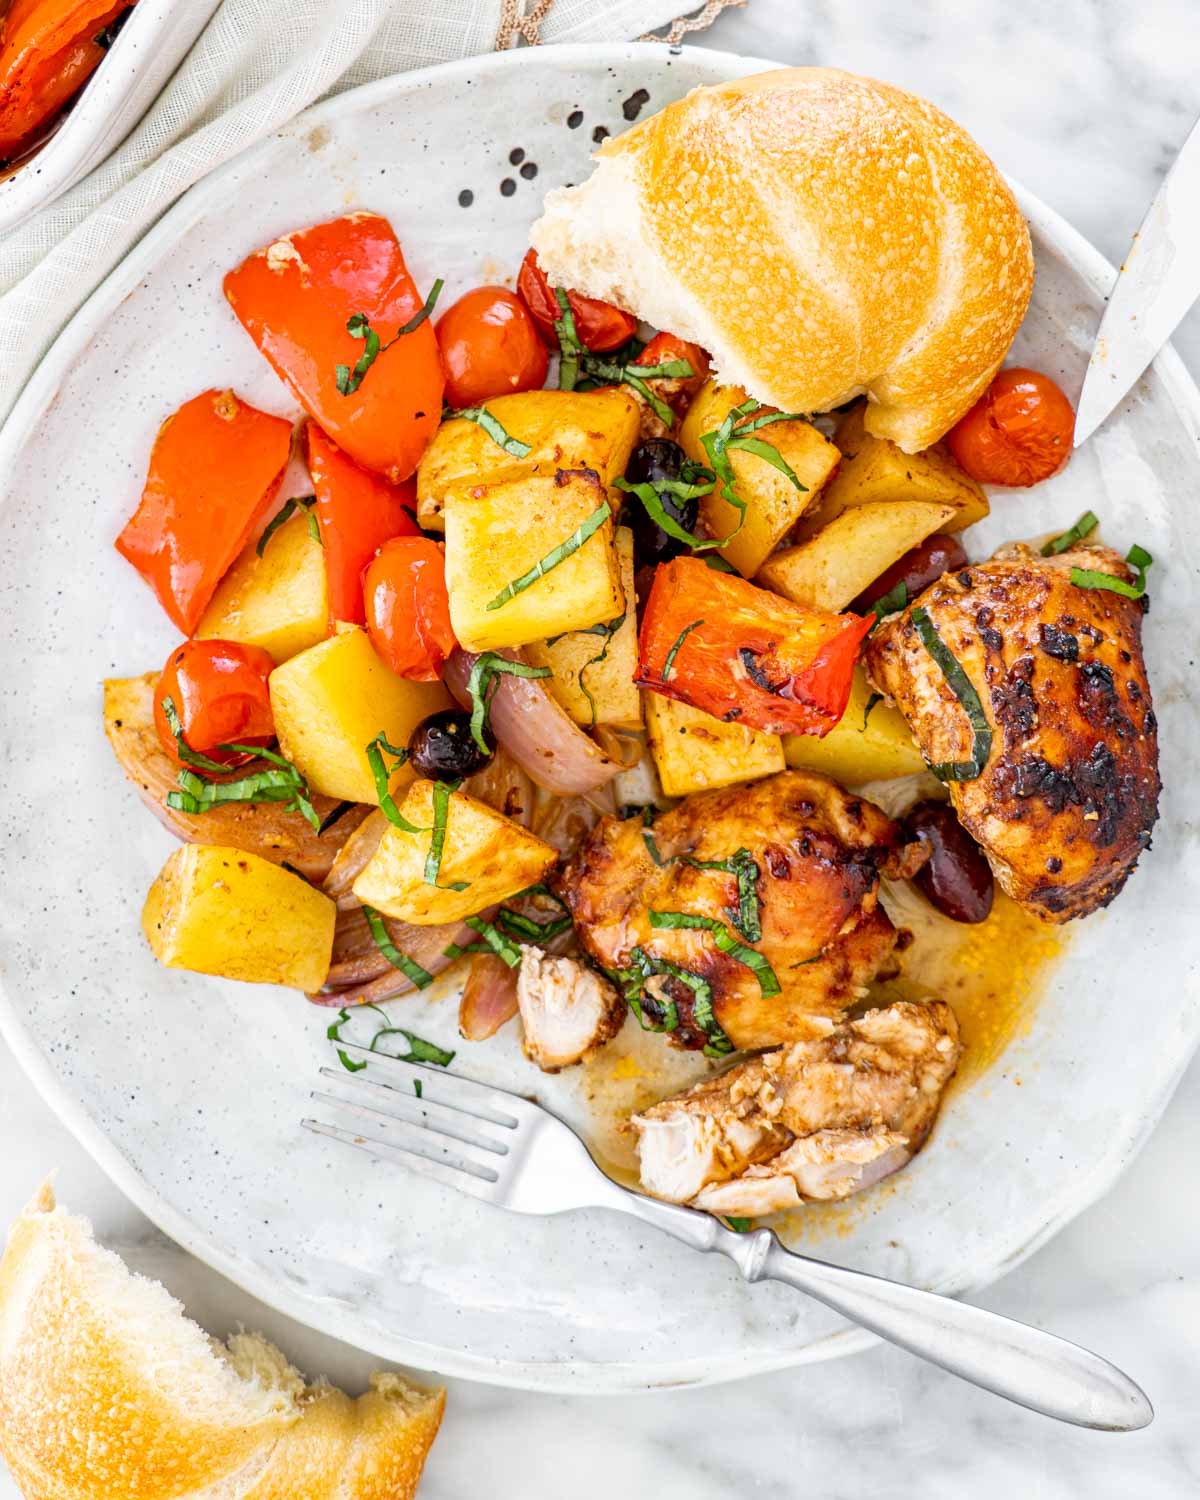 roasted chicken and vegetables on a plate with bread and a fork